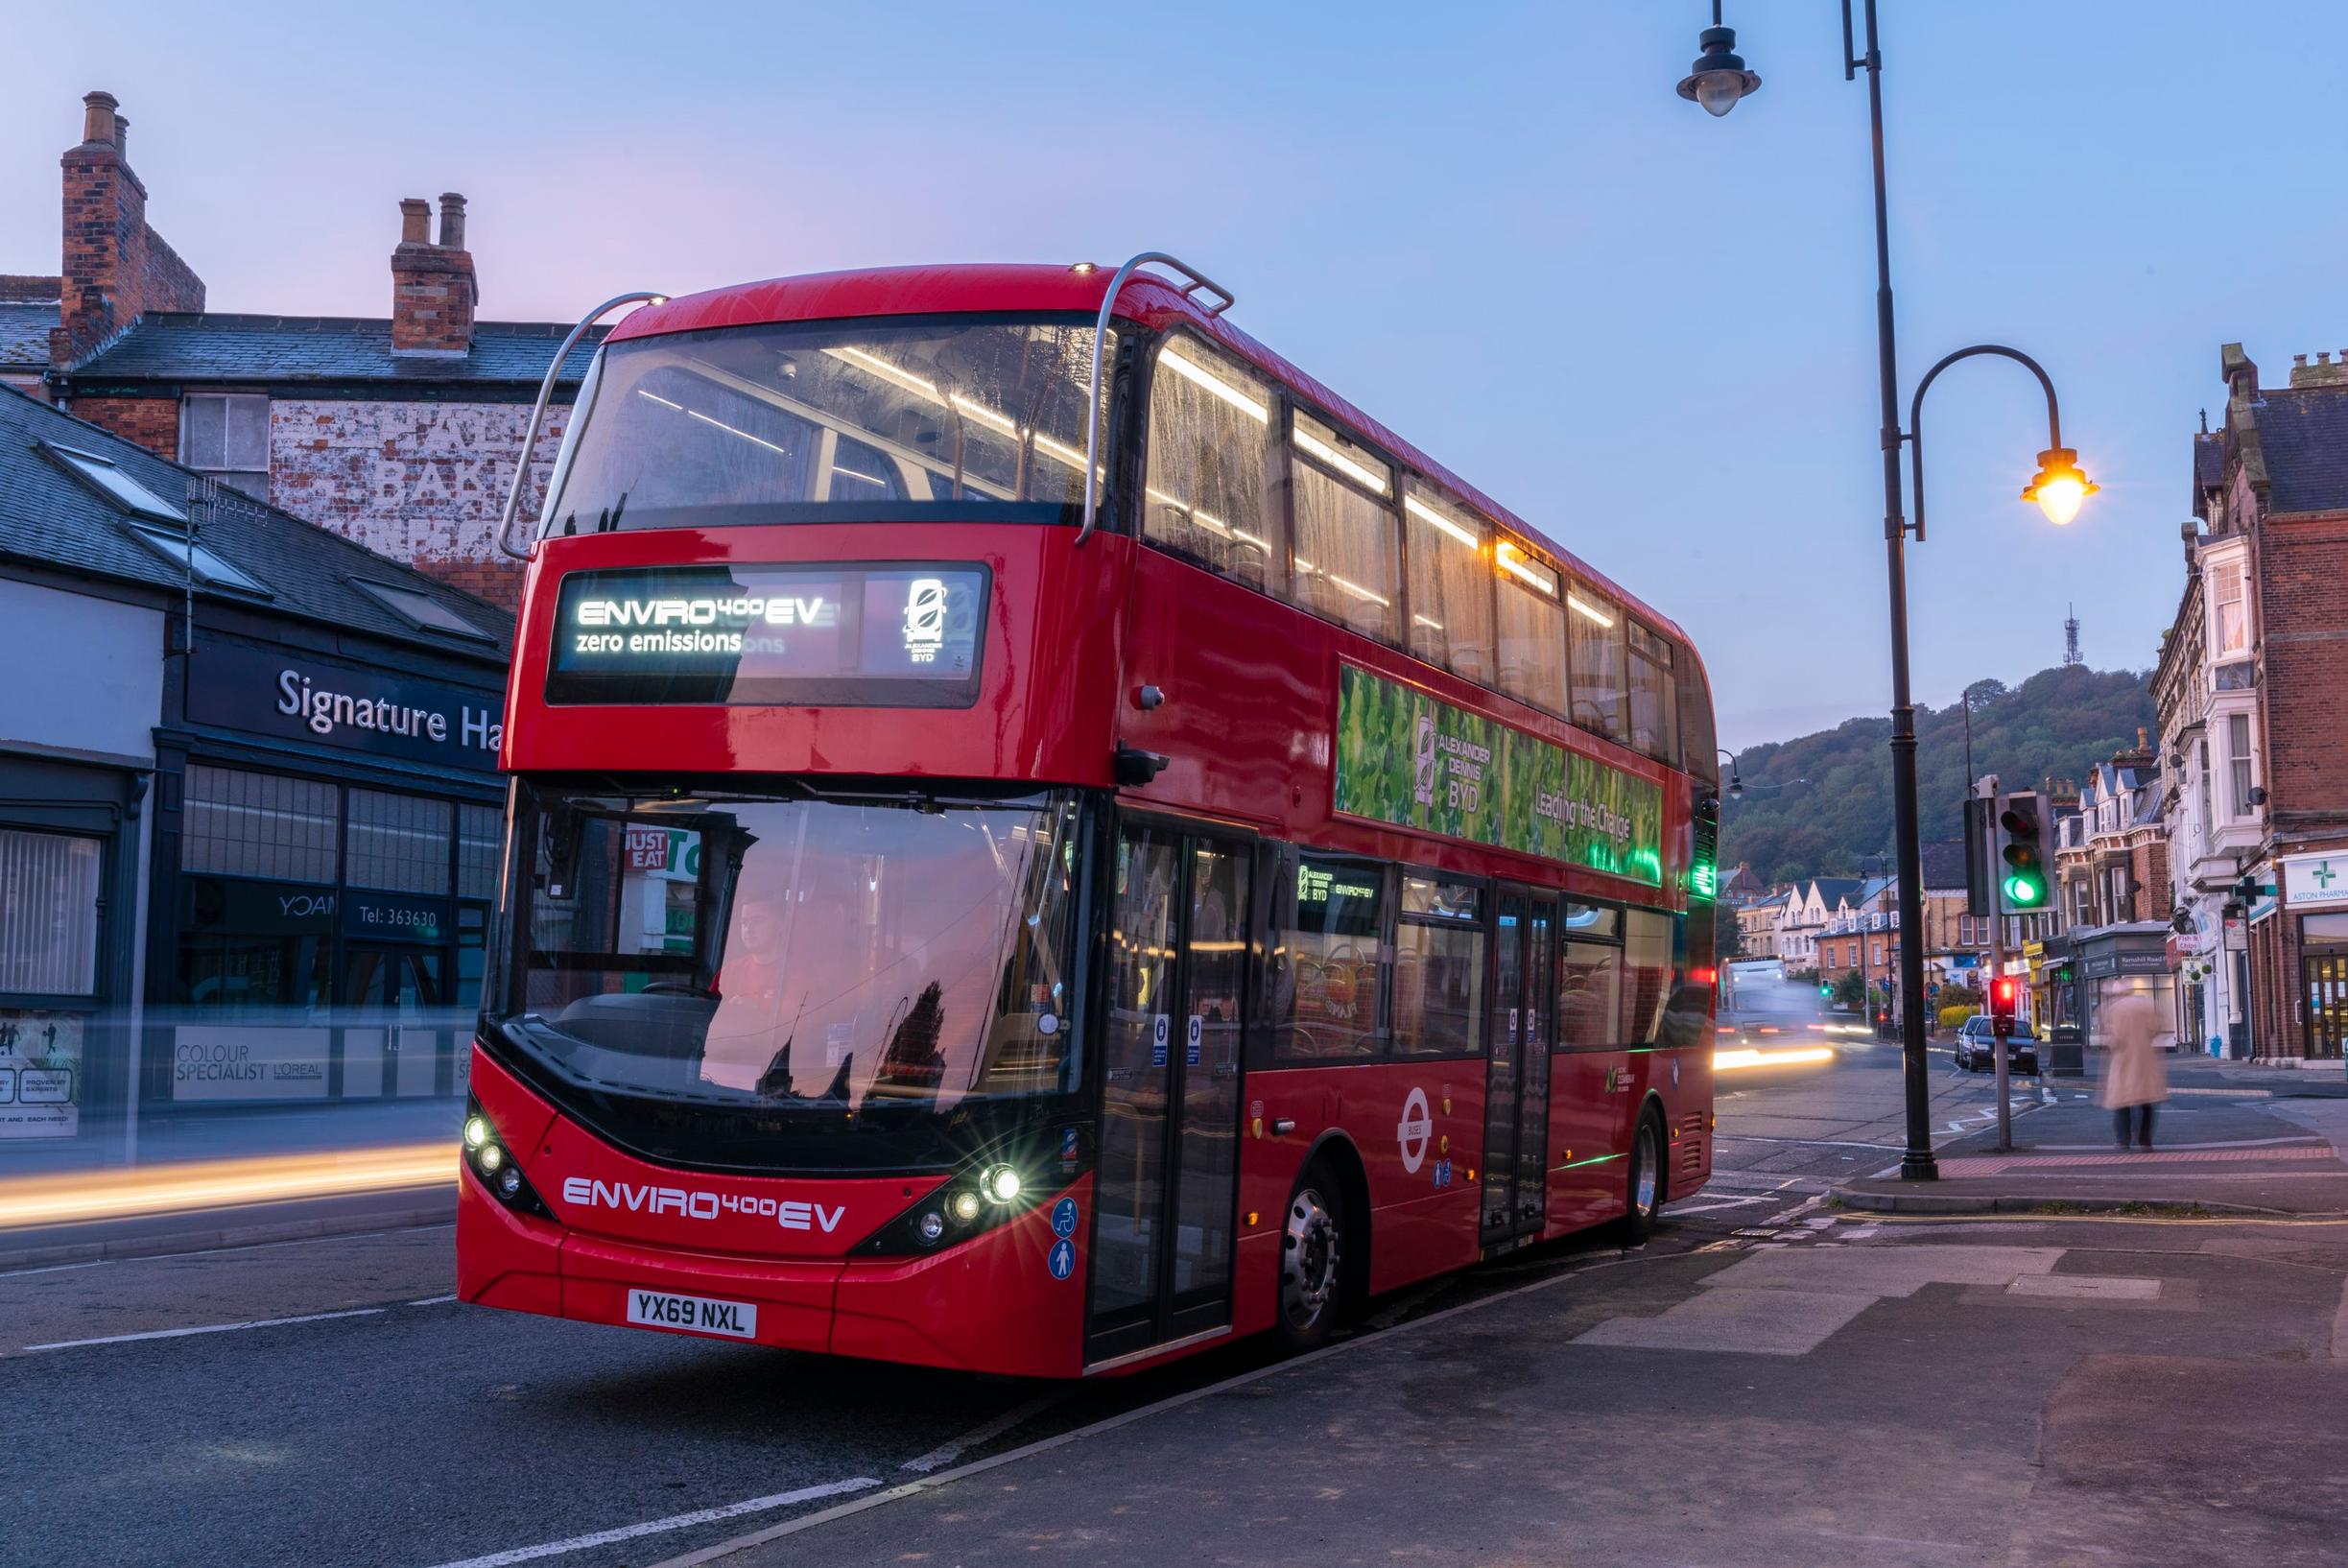 CCRA3 says: `The government accepts that the decarbonisation of transport and the associated reliance on electricity needs to be considered. An internal Climate Change Adaptation DfT strategy is currently being drafted` (Image courtesy Alexander Dennis / BYD)